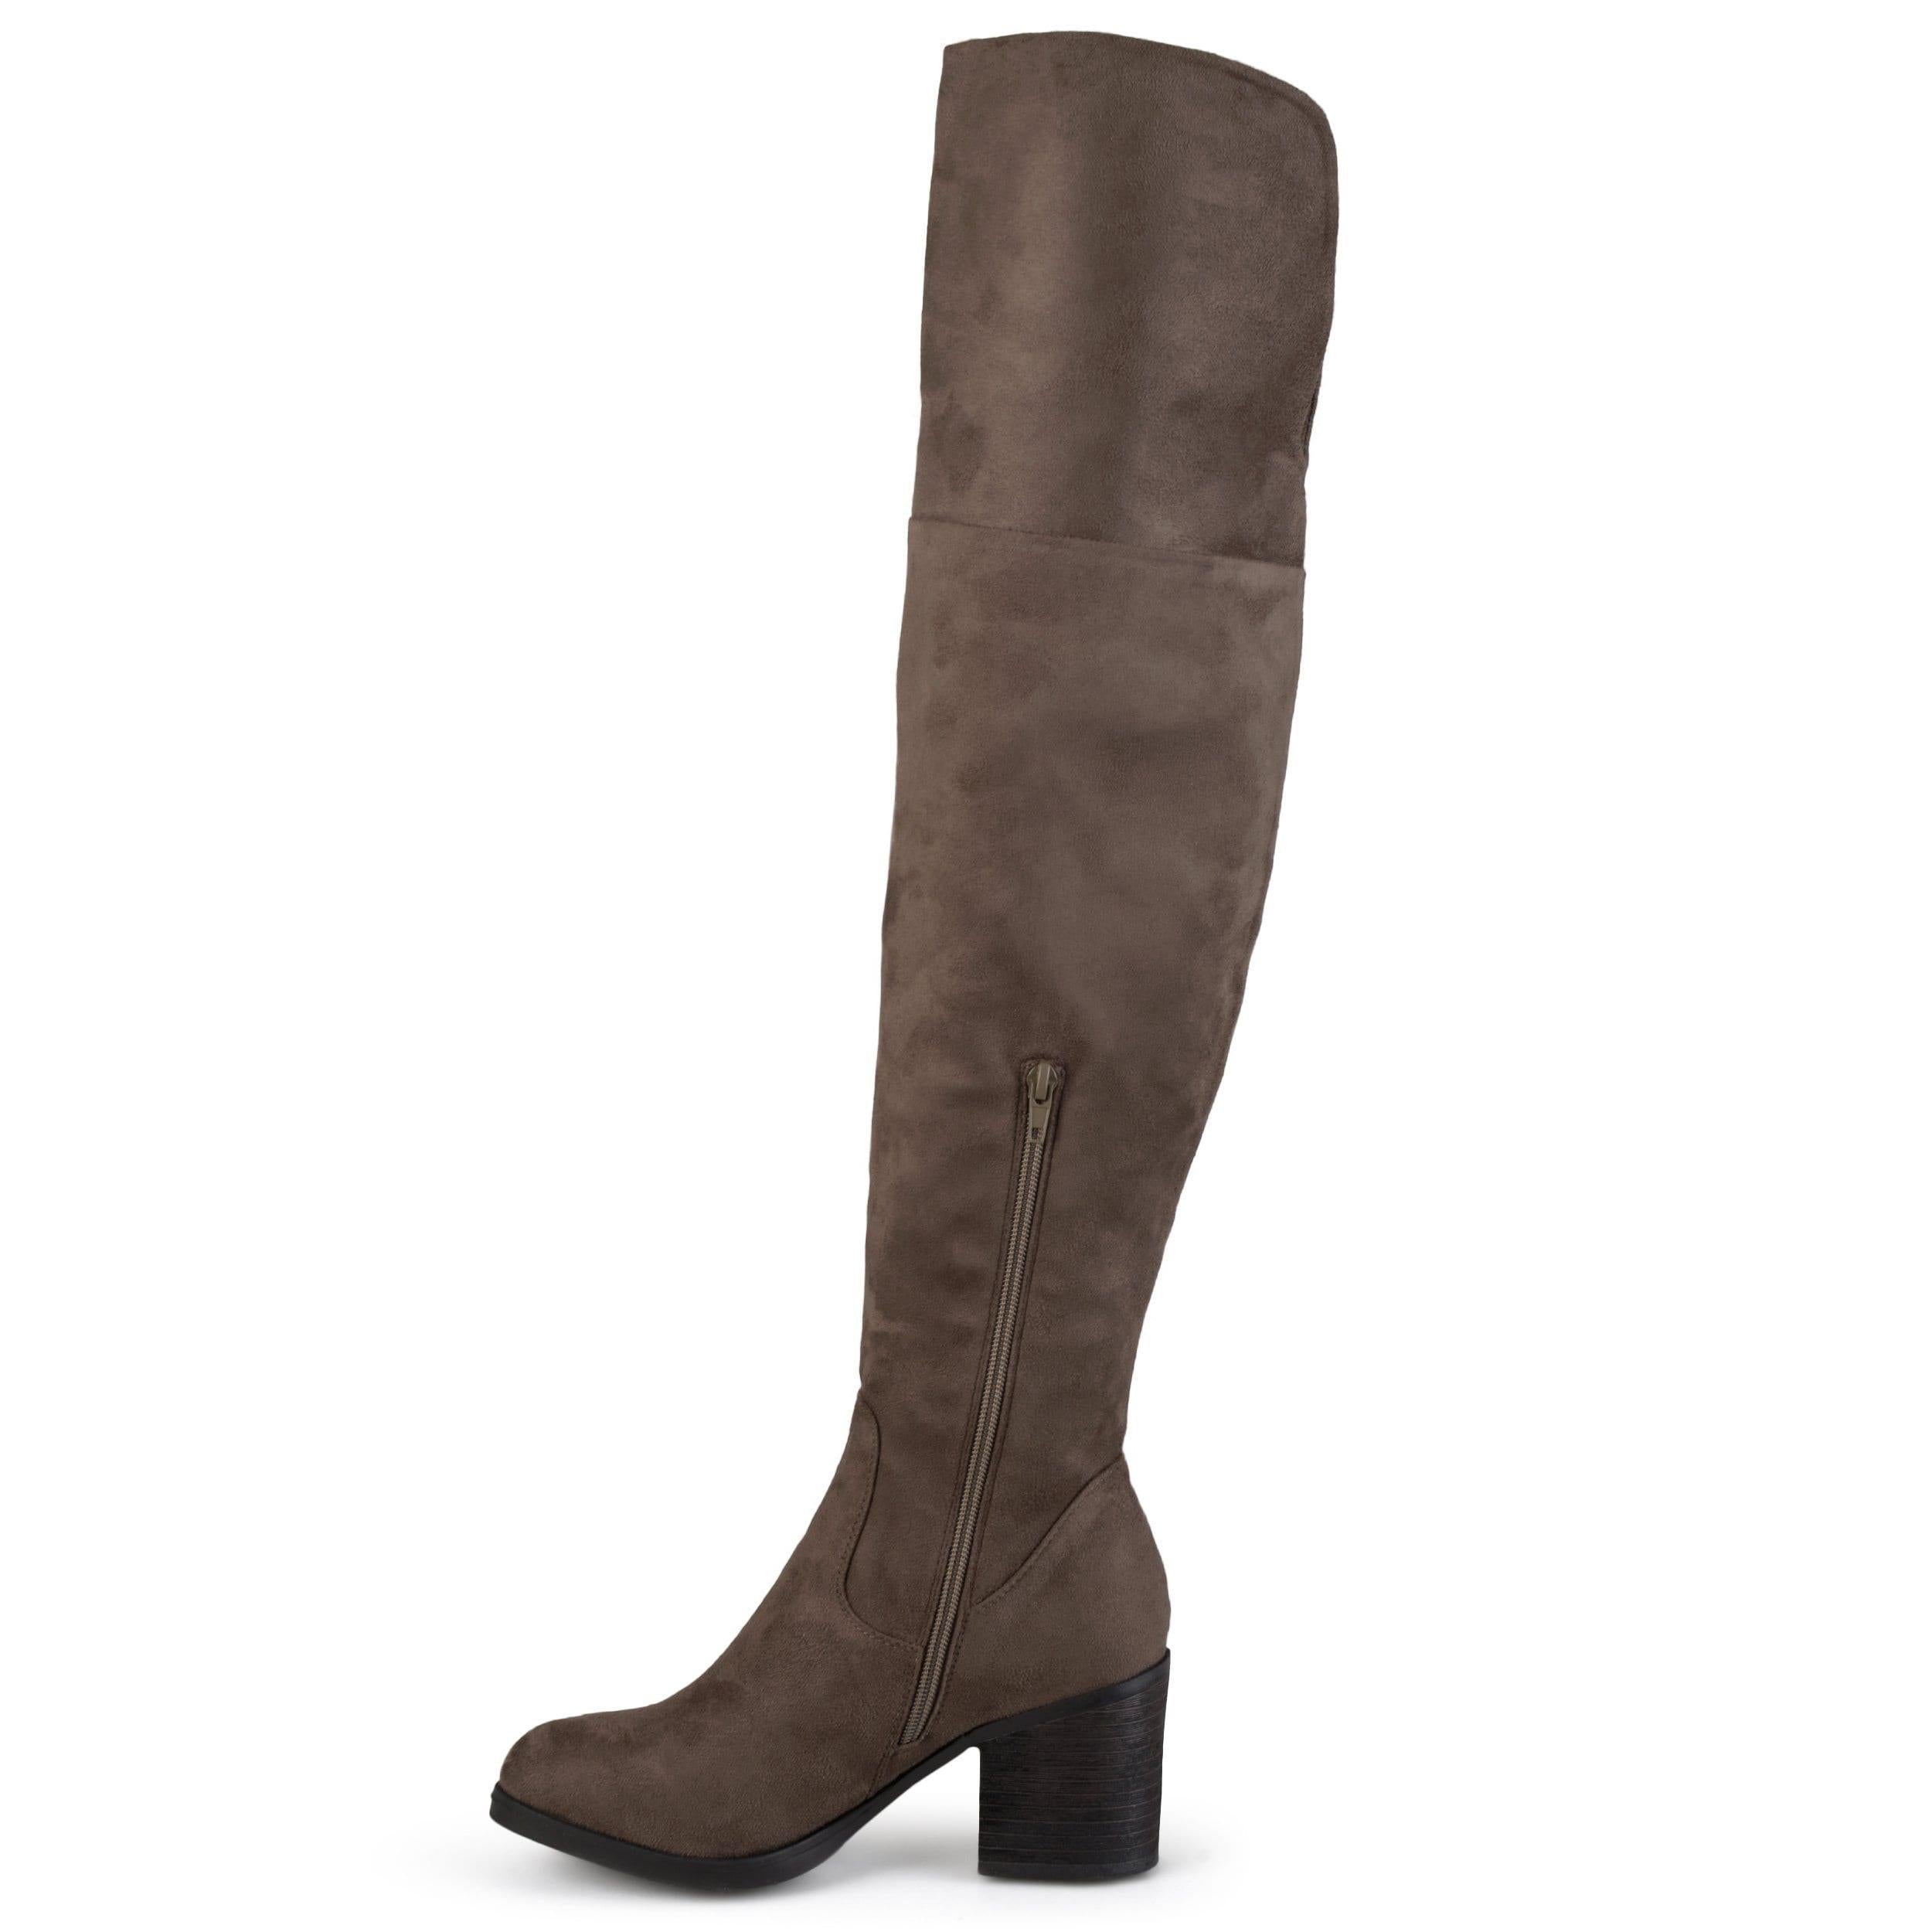 Sana Boot | Women's Over The Knee Boots | Journee Collection